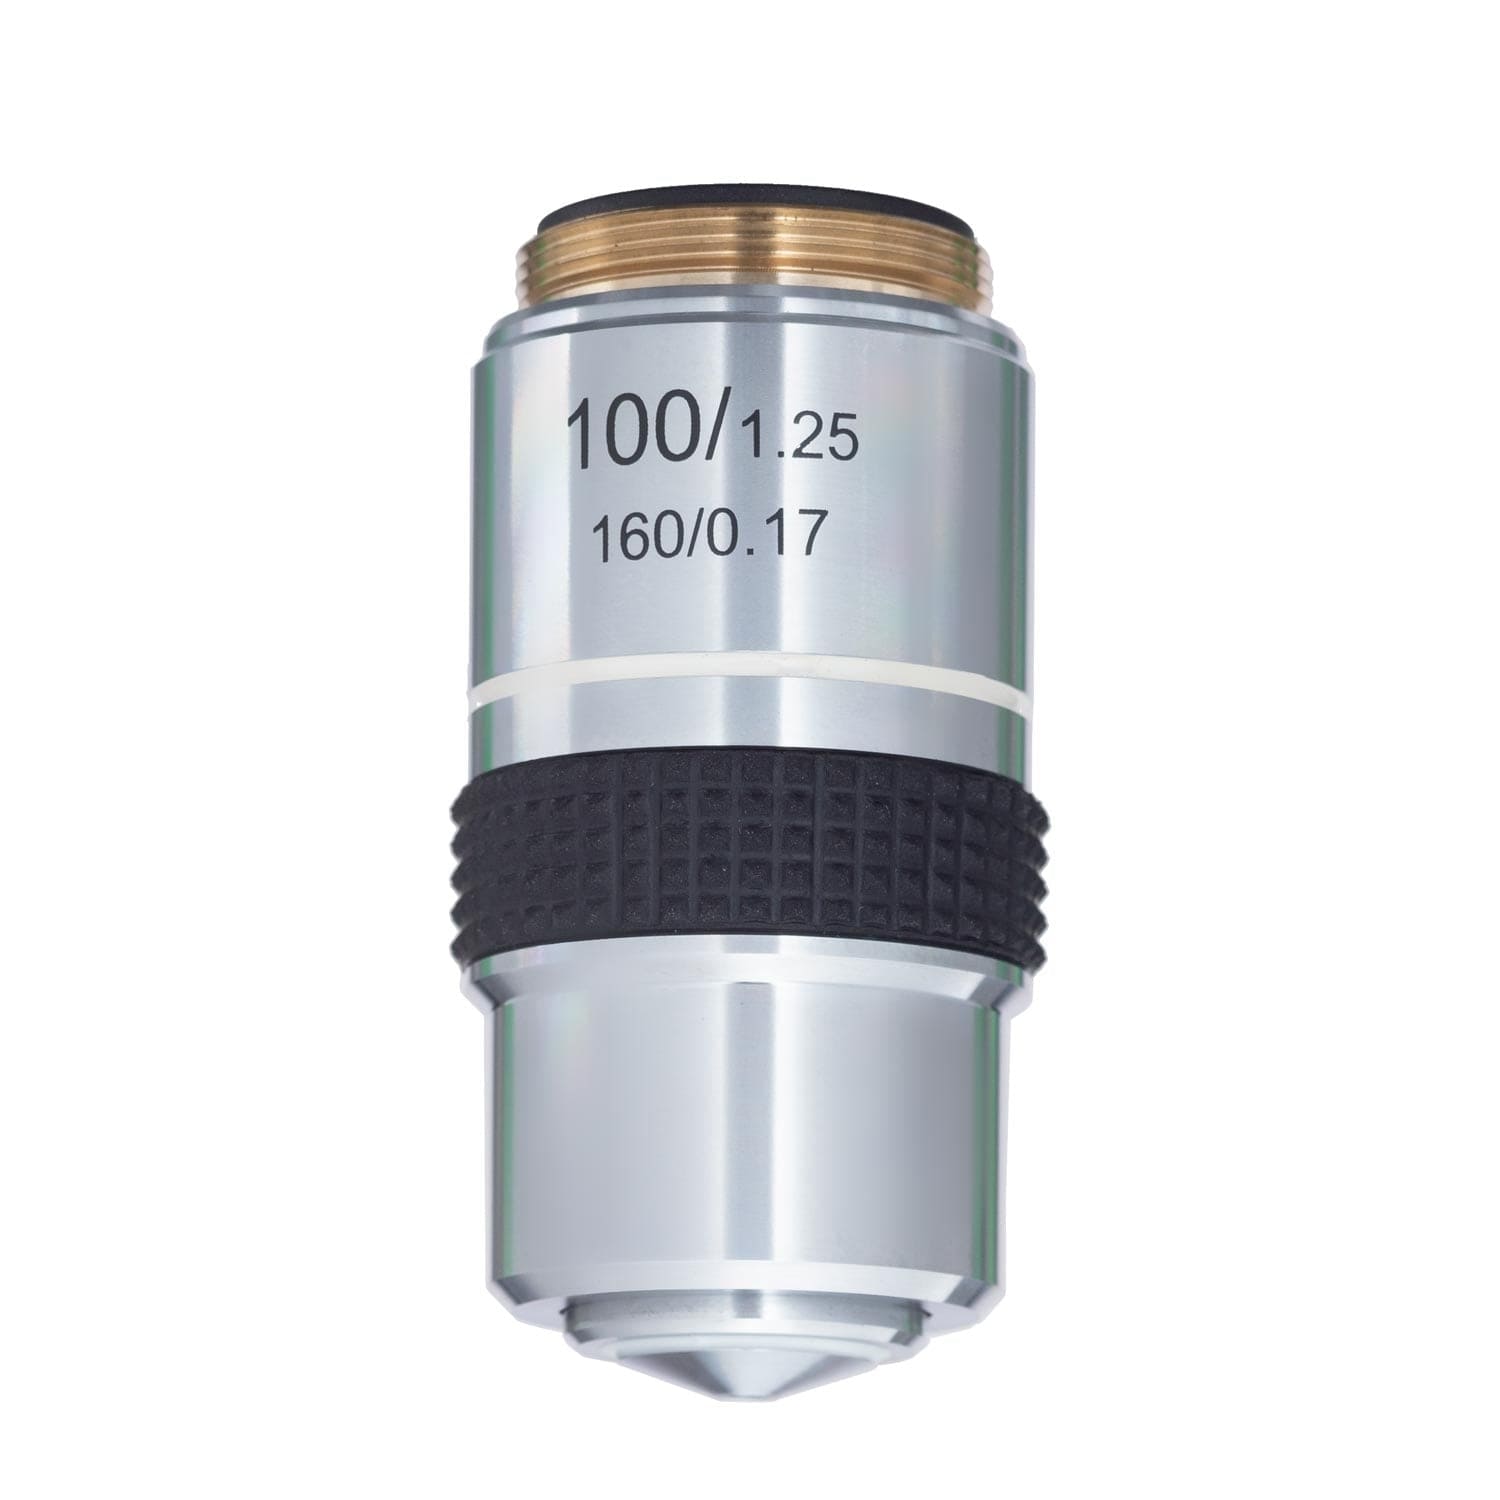 What is the 100x objective lens called?